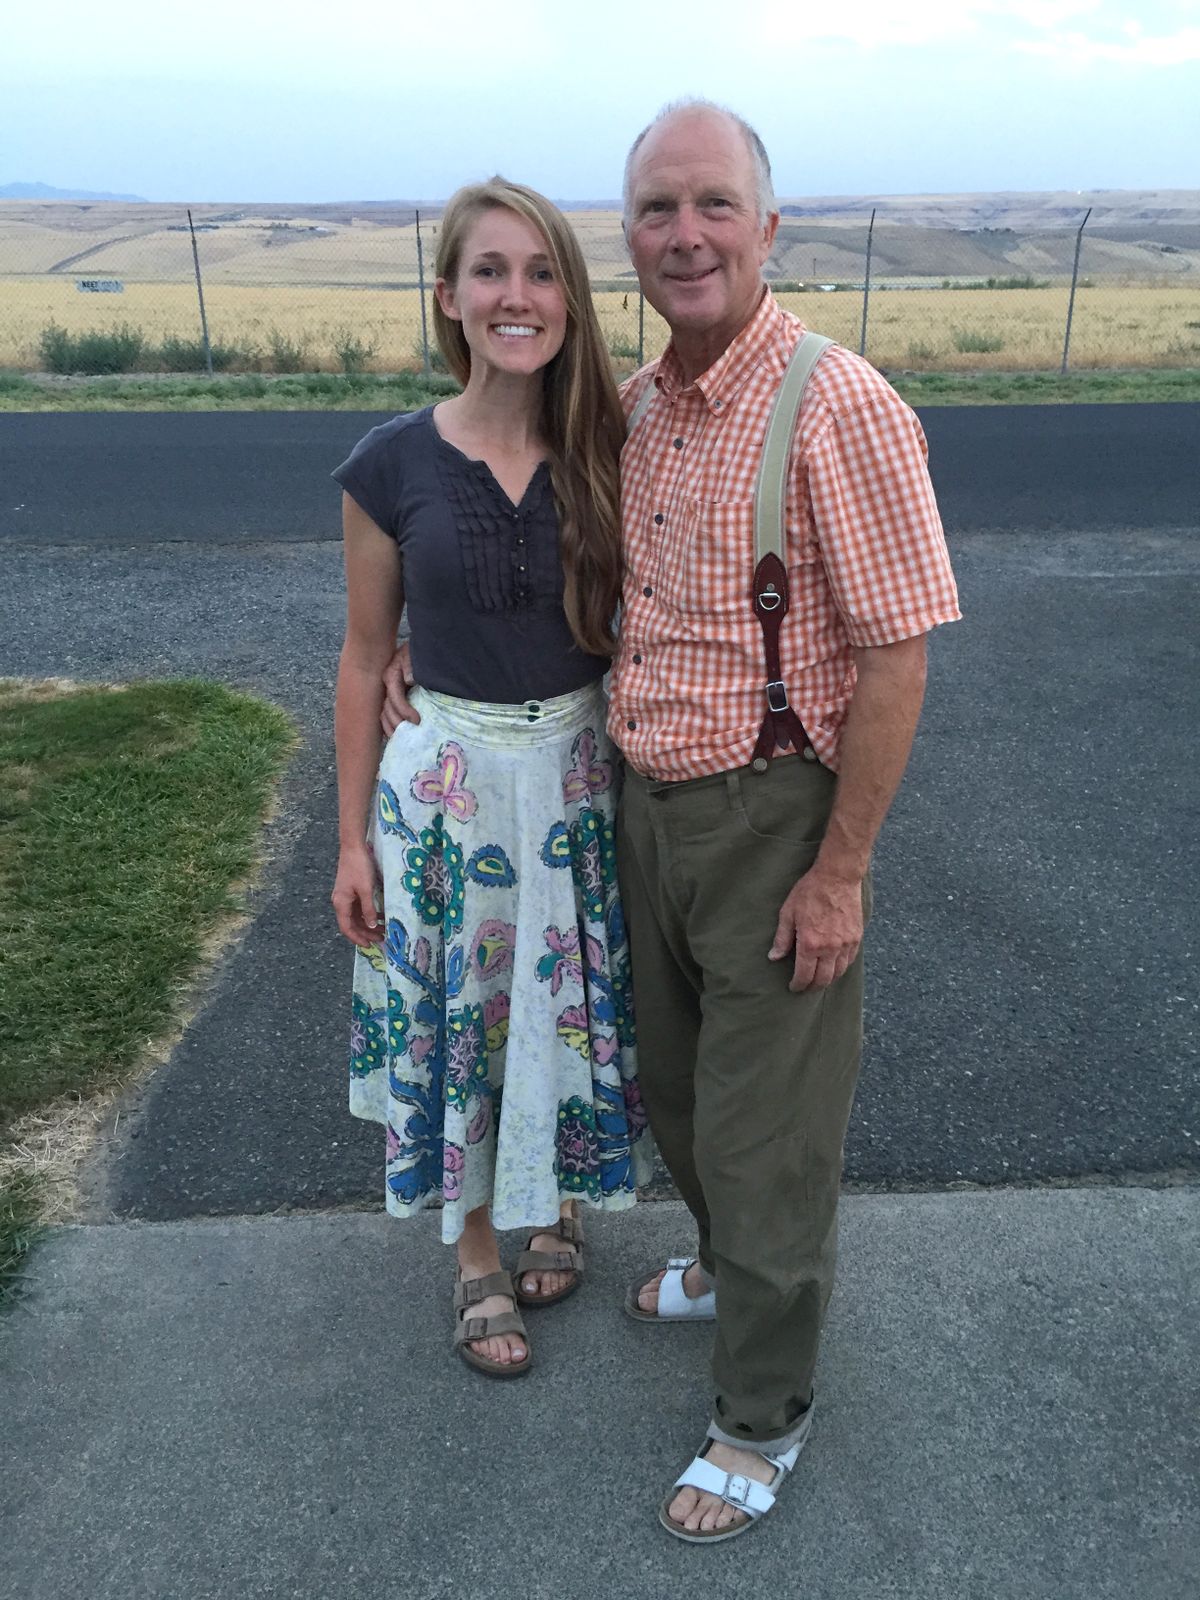 Jay Cawley, right, is seen with his daughter Jessica in an undated family photo. Cawley was in one of the airplanes that crashed over Lake Coeur d’Alene Sunday, July 5, 2020.  (JESSE TINSLEY)